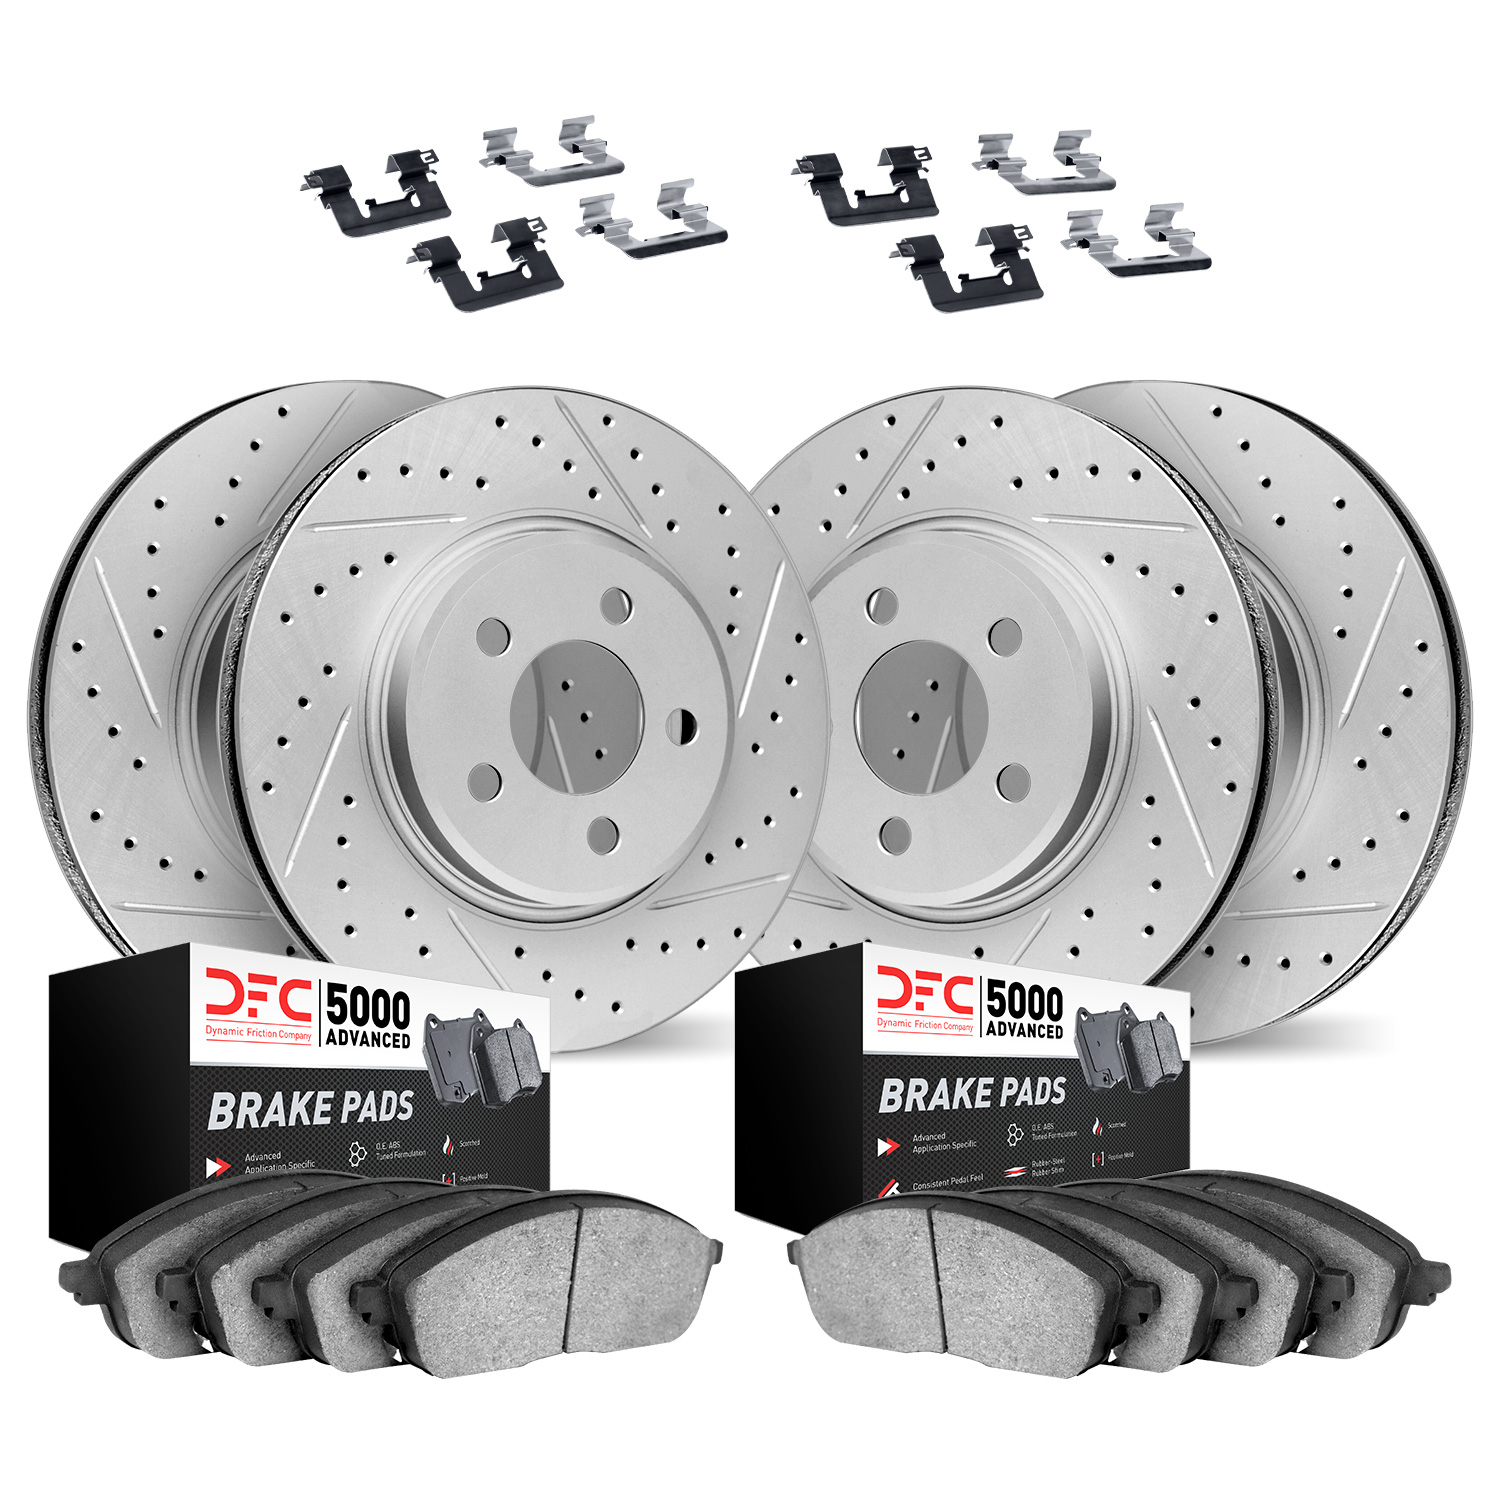 2514-11010 Geoperformance Drilled/Slotted Rotors w/5000 Advanced Brake Pads Kit & Hardware, 2006-2009 Land Rover, Position: Fron